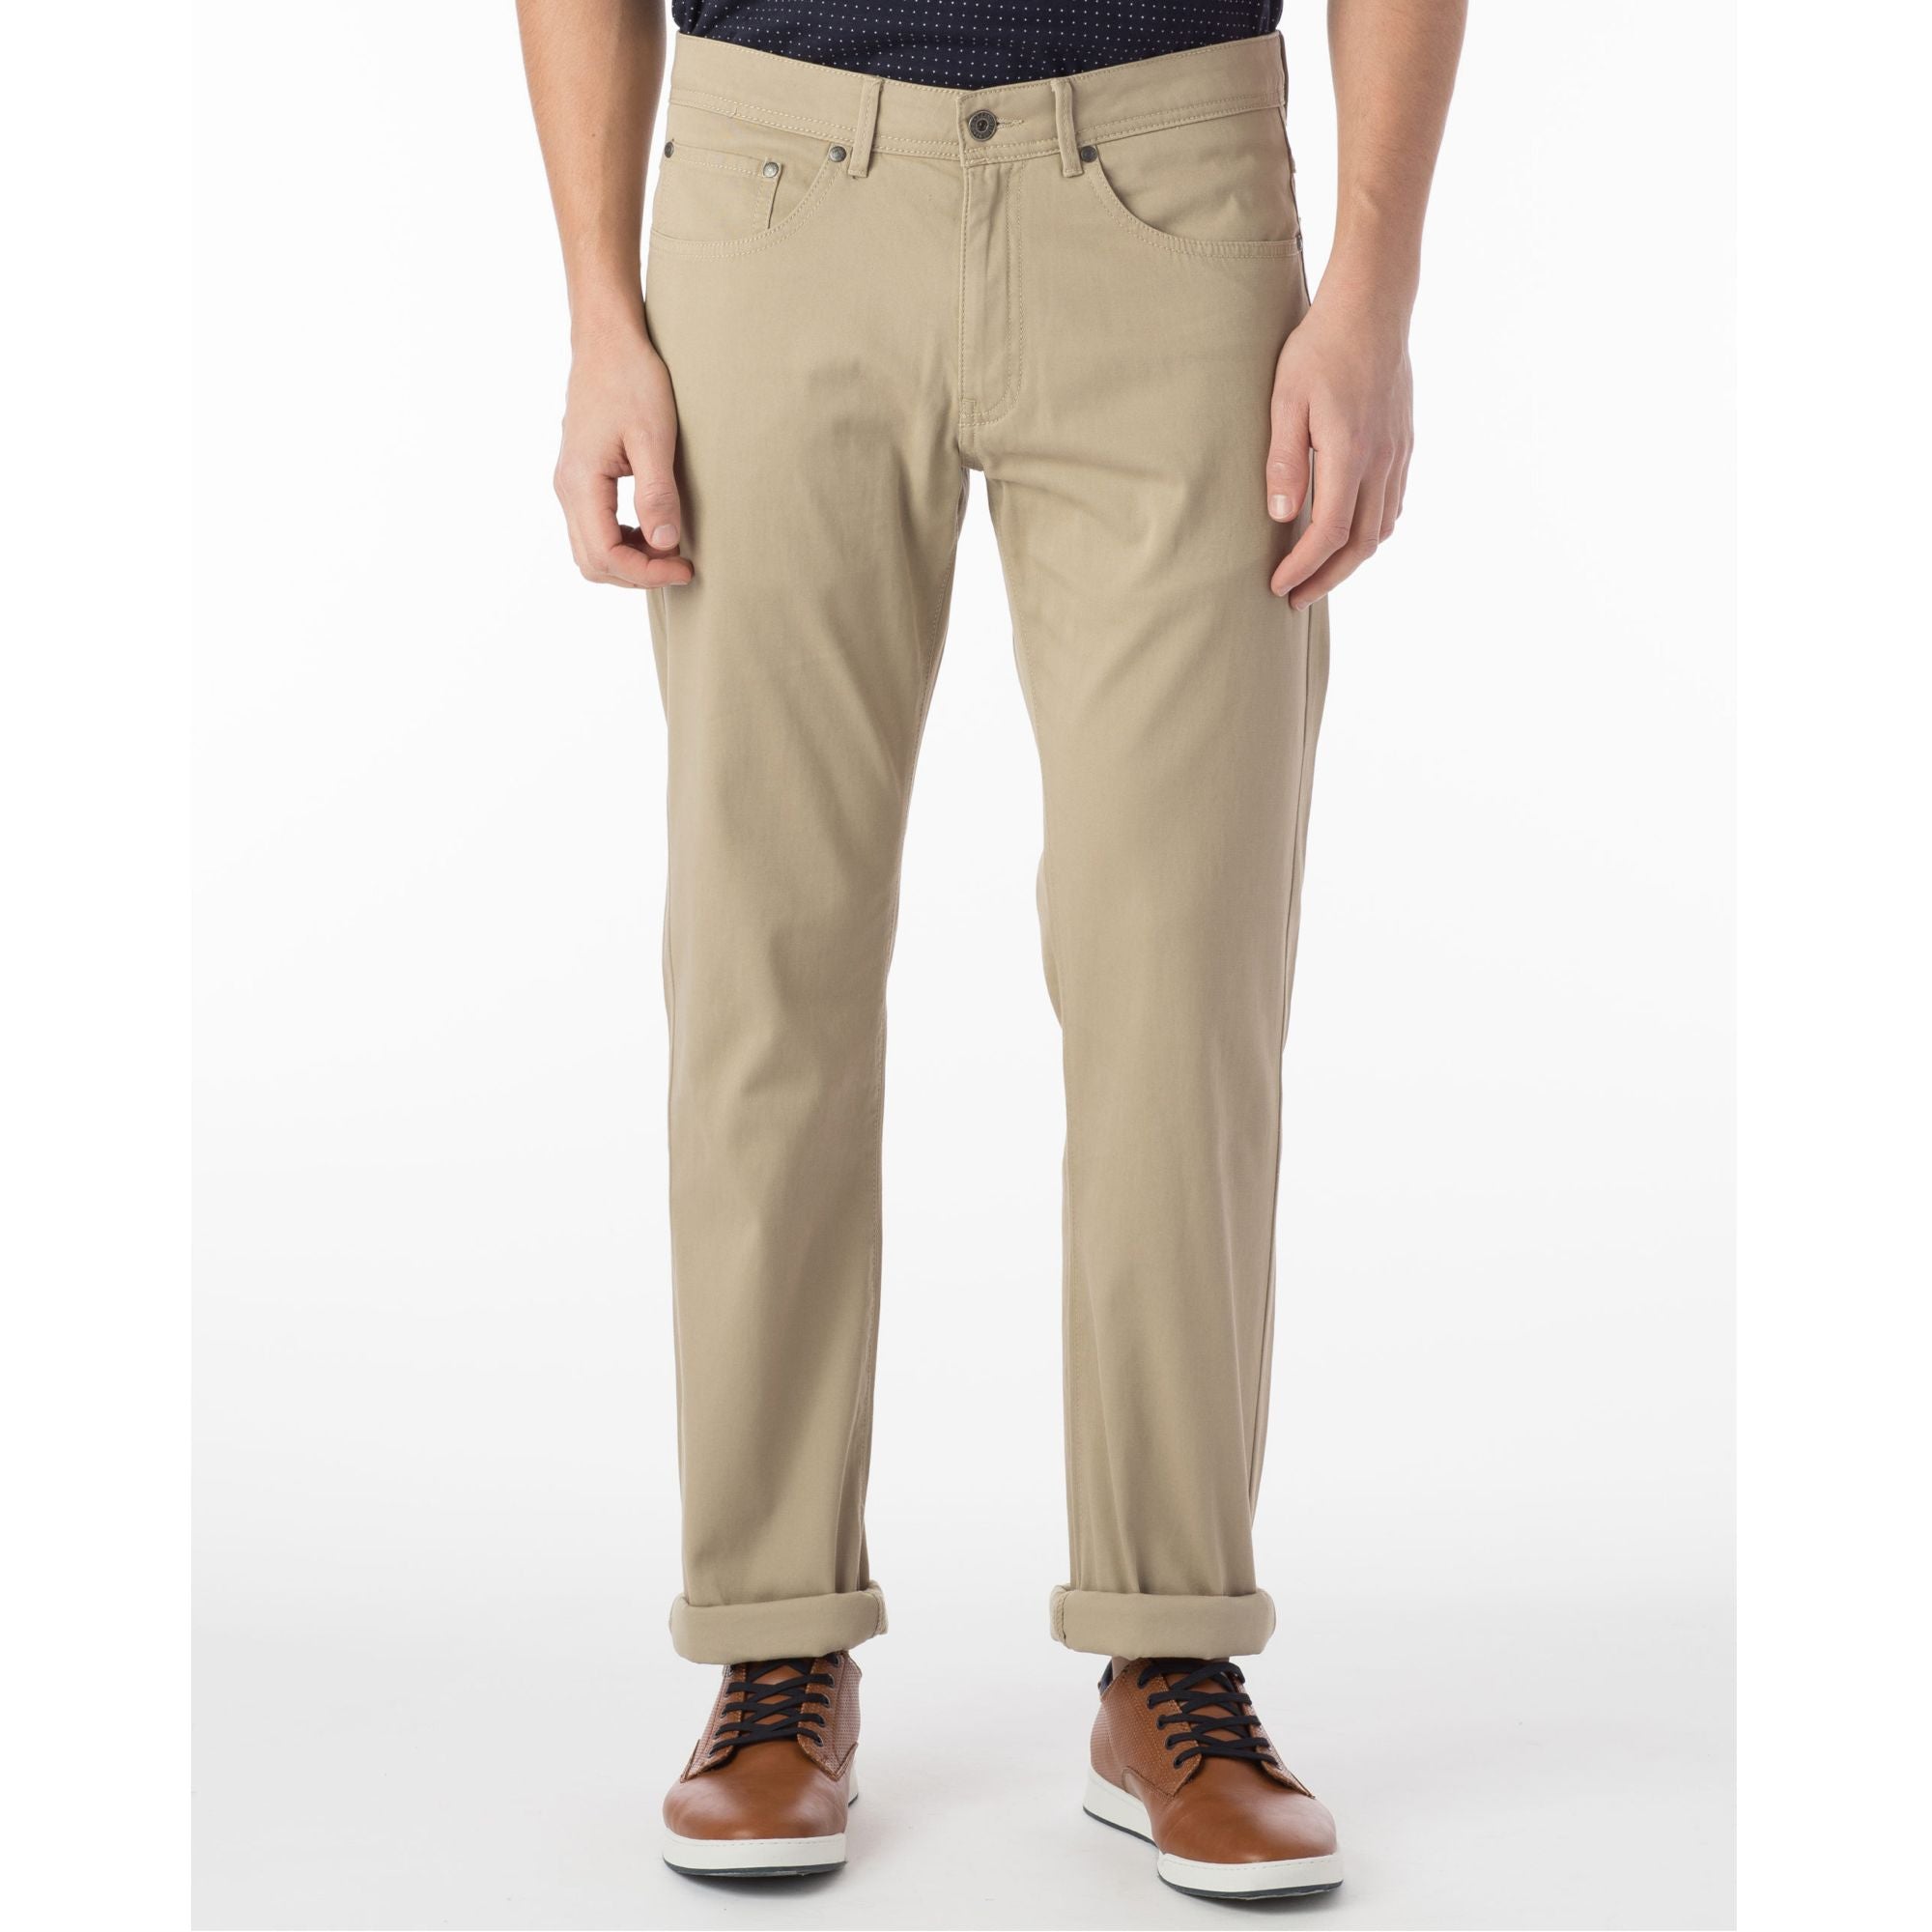 Perma Color Pima Twill 5-Pocket Pants in True Khaki, Size 36 (Crescent Modern Fit) by Ballin